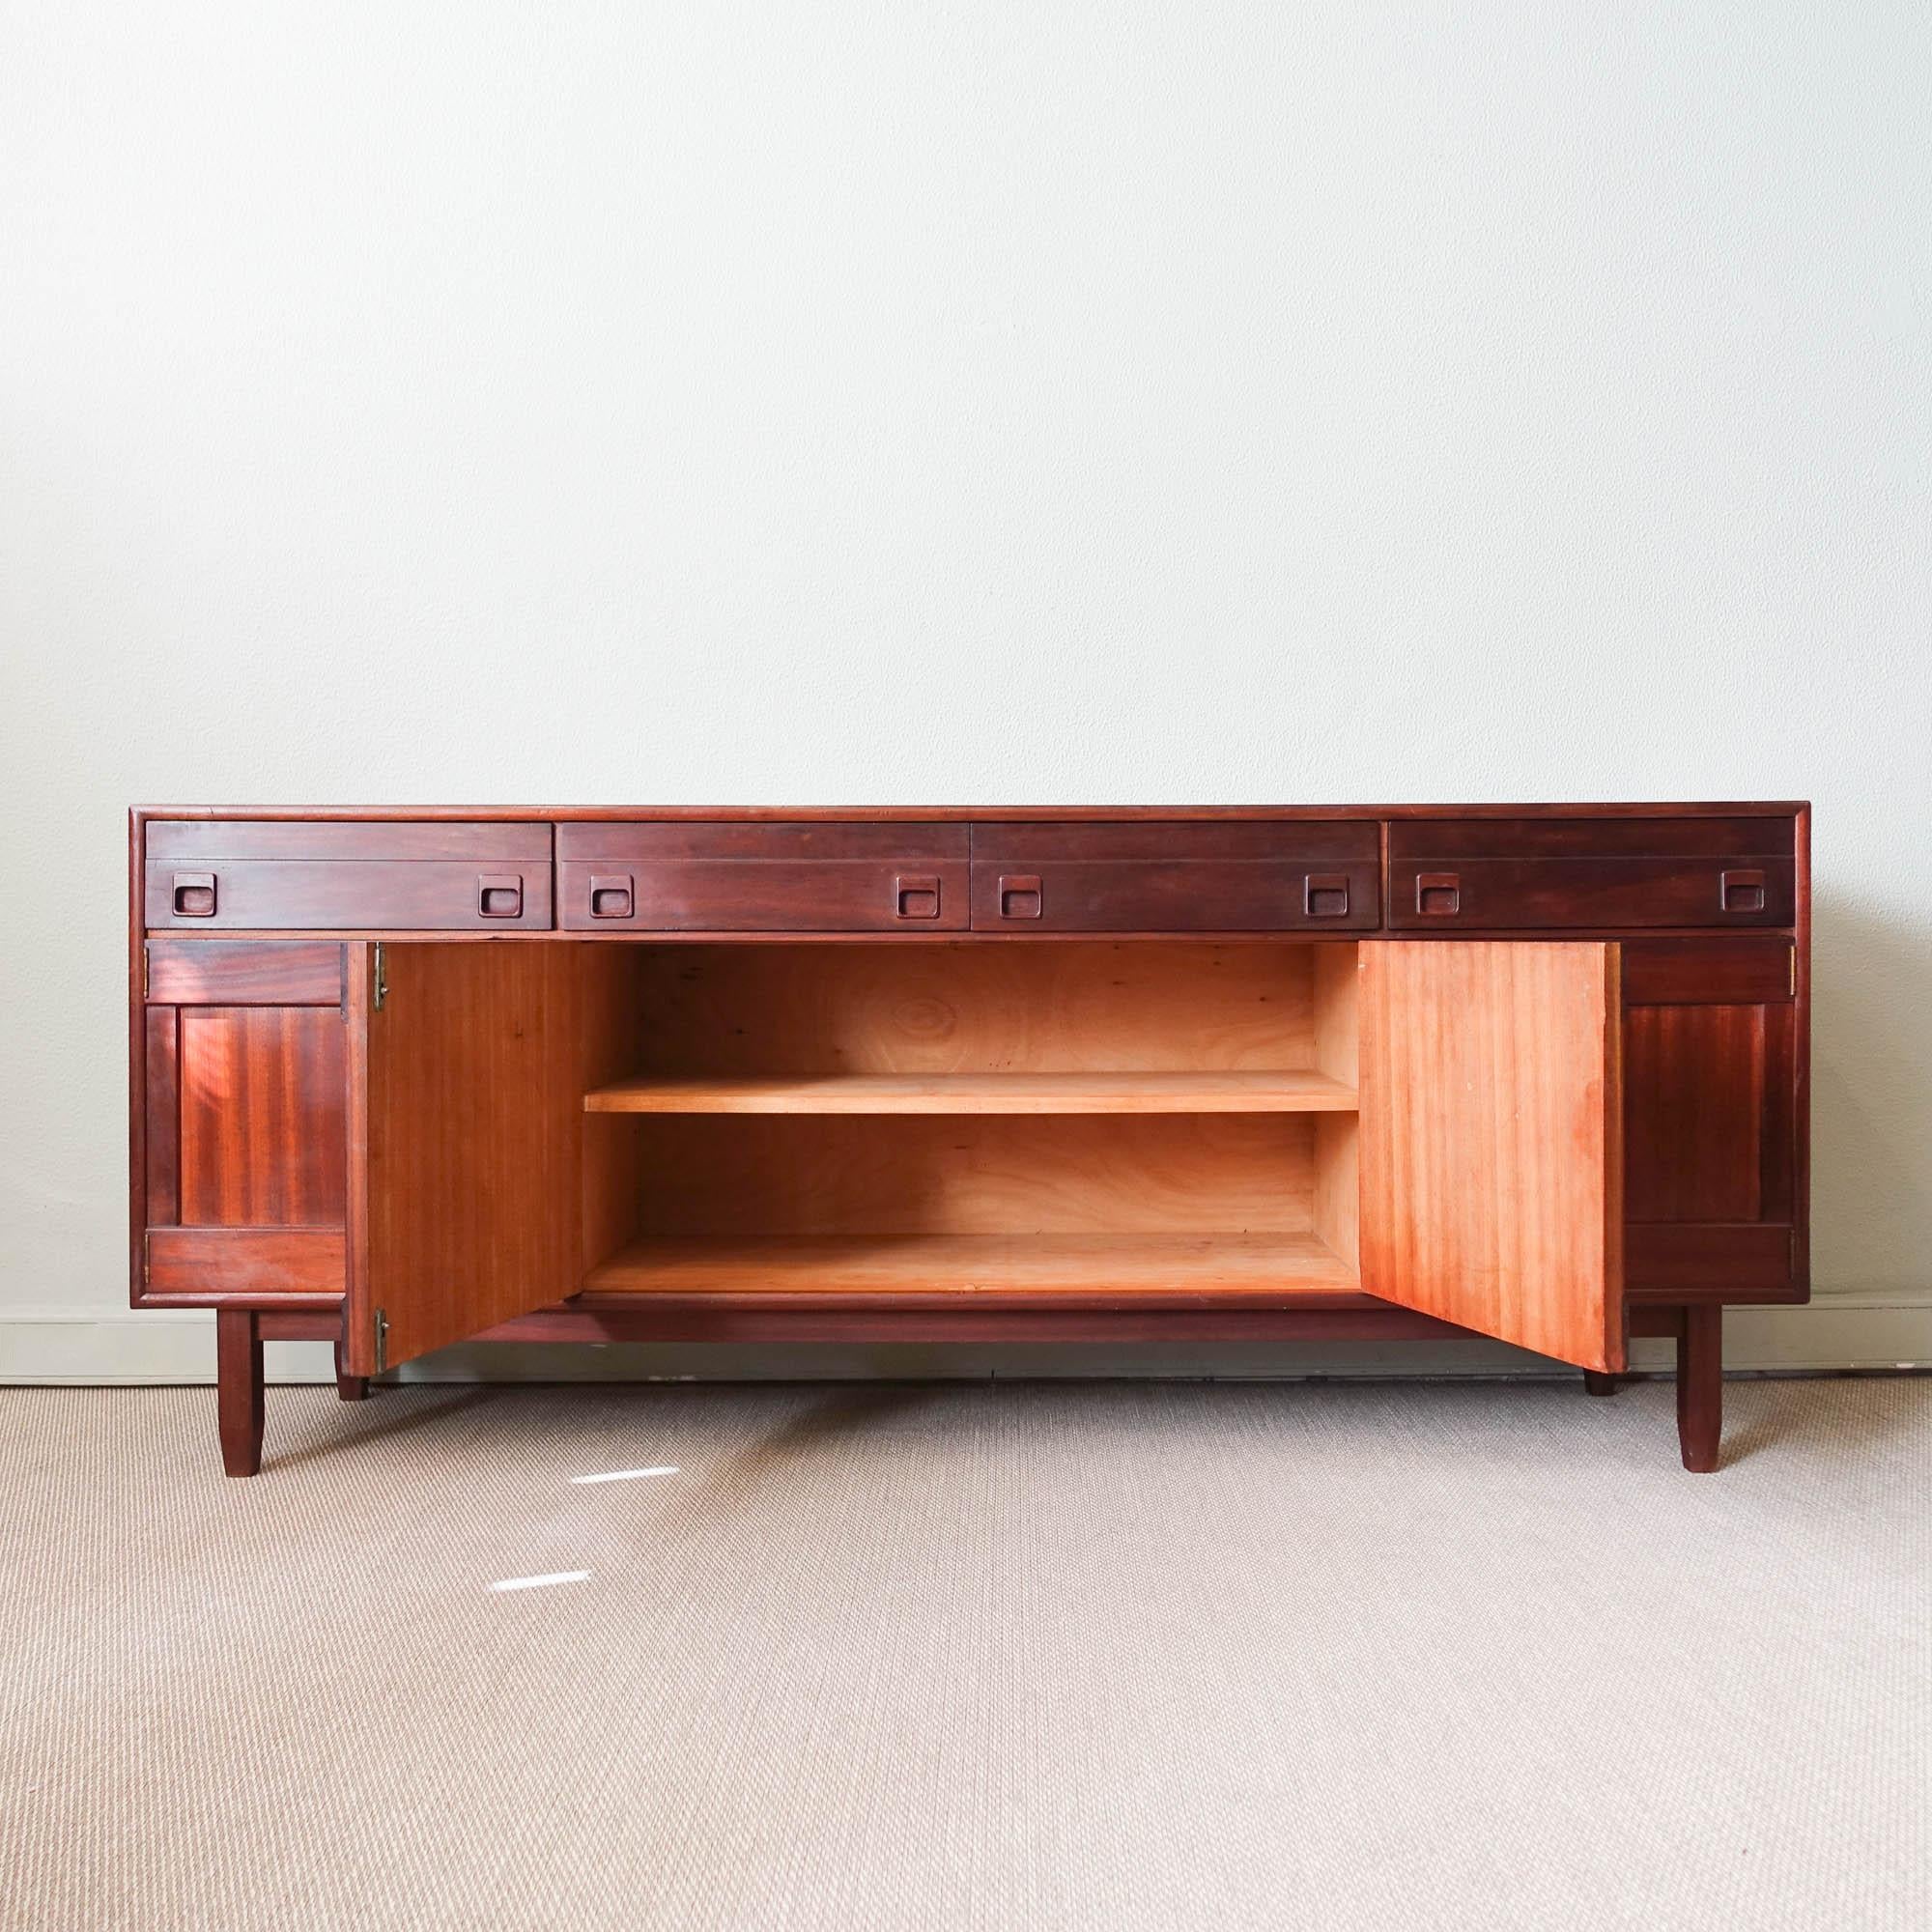 Portuguese Mid-Century Sideboard by Olaio, 1970's For Sale